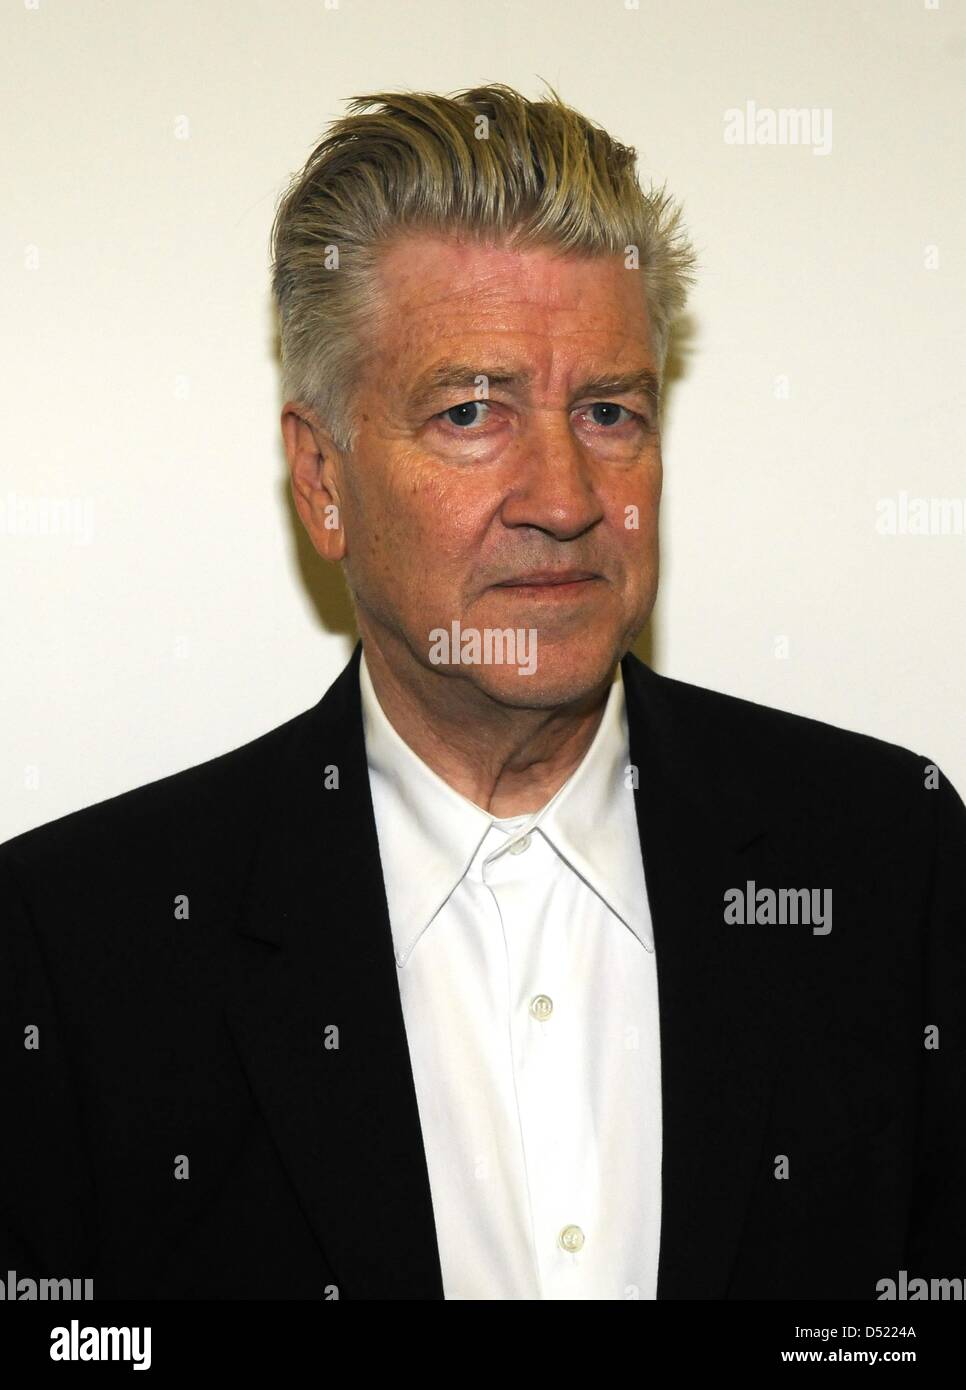 US filmmaker David Lynch pictured at the 'Cologne Conference' in Cologne, Germany, 01 October 2010. Photo: Horst Galuschka Stock Photo